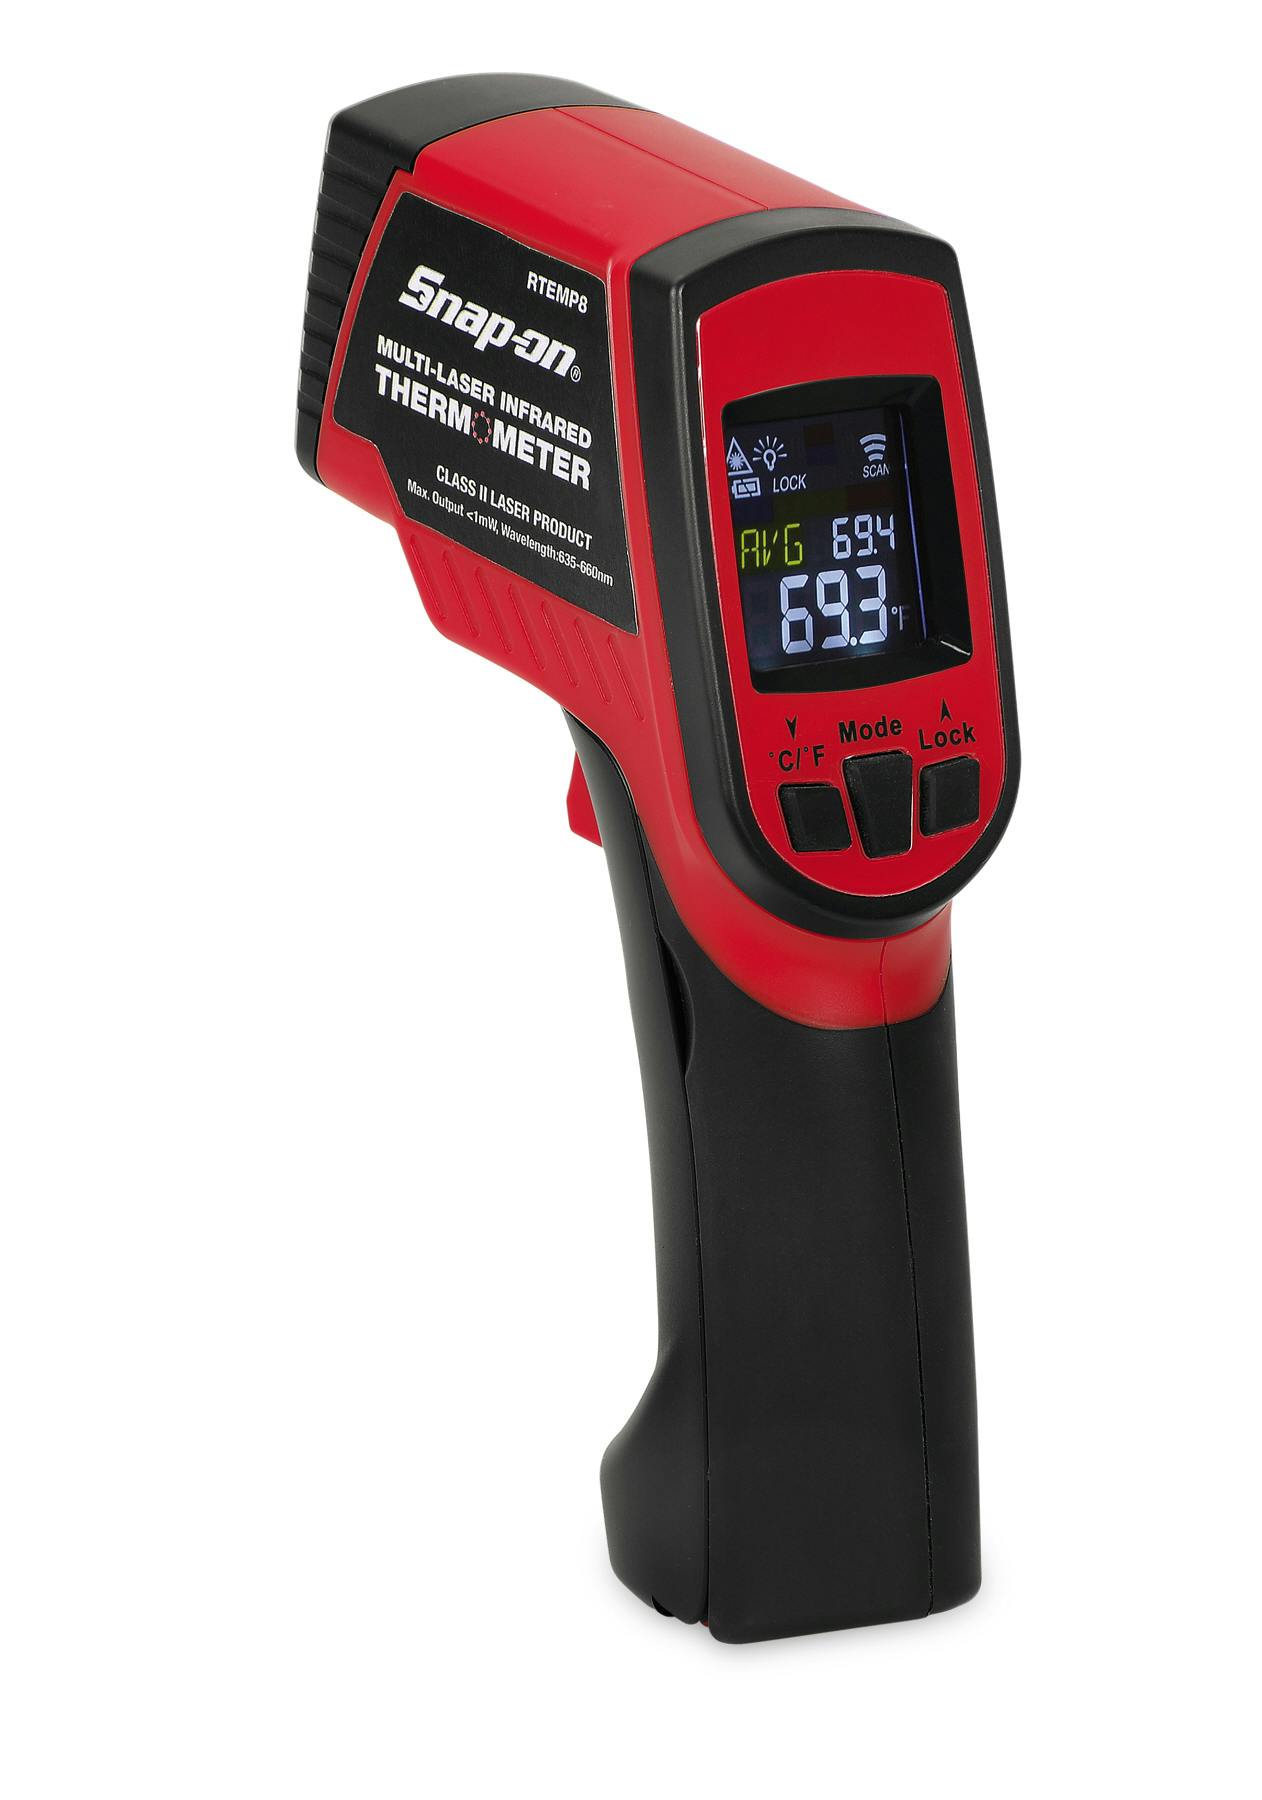 Multi-Laser Infrared Thermometer, RTEMP8